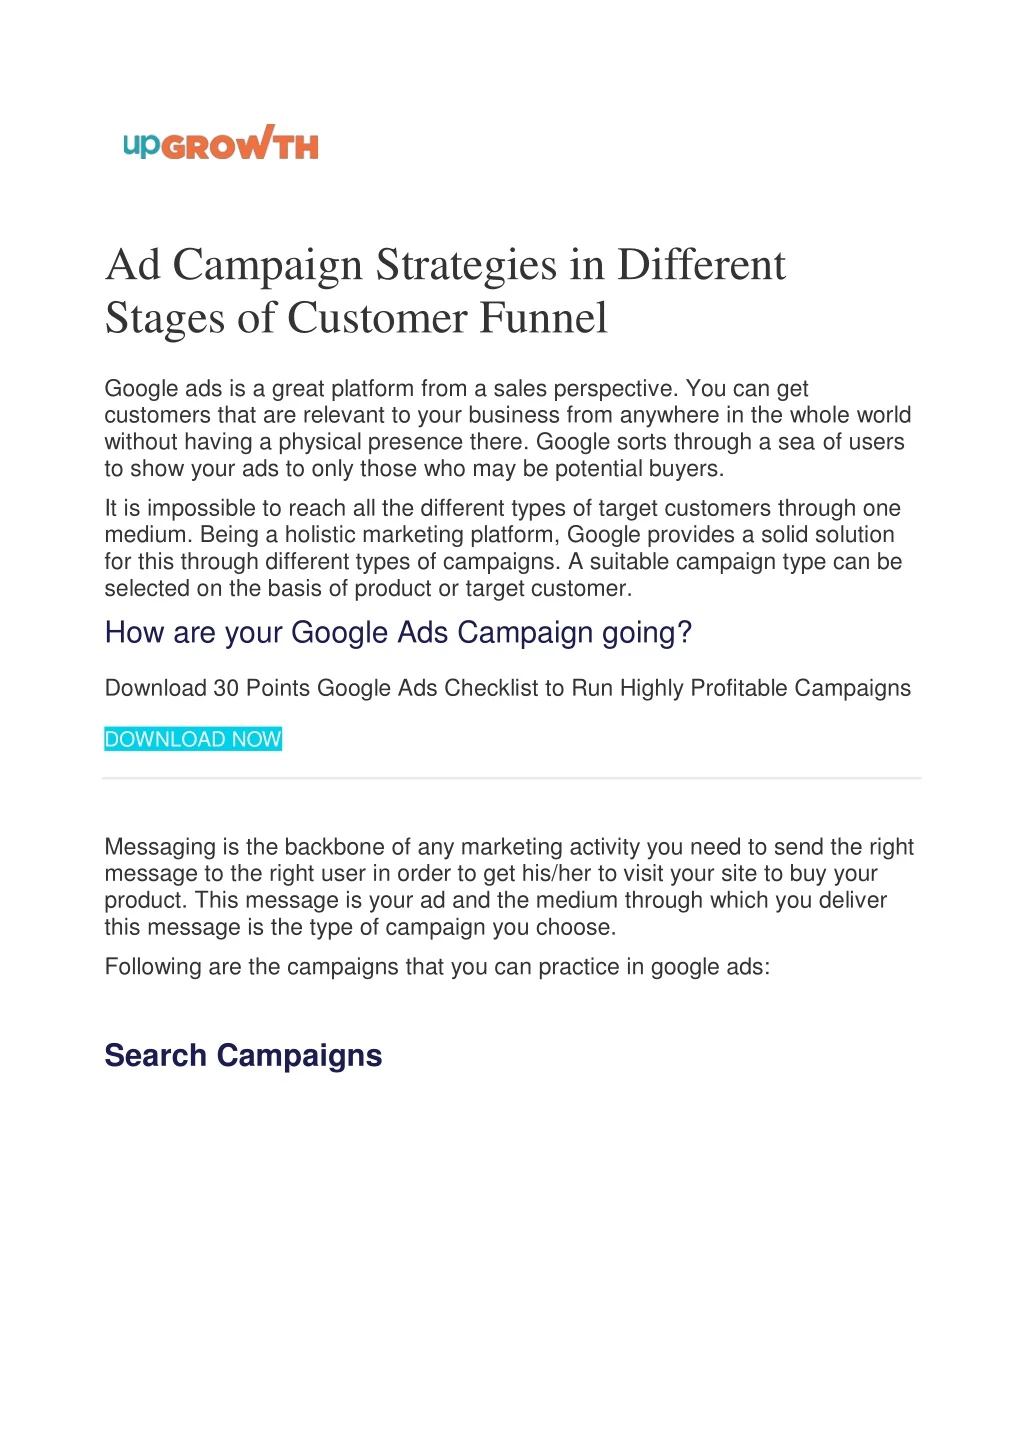 ad campaign strategies in different stages